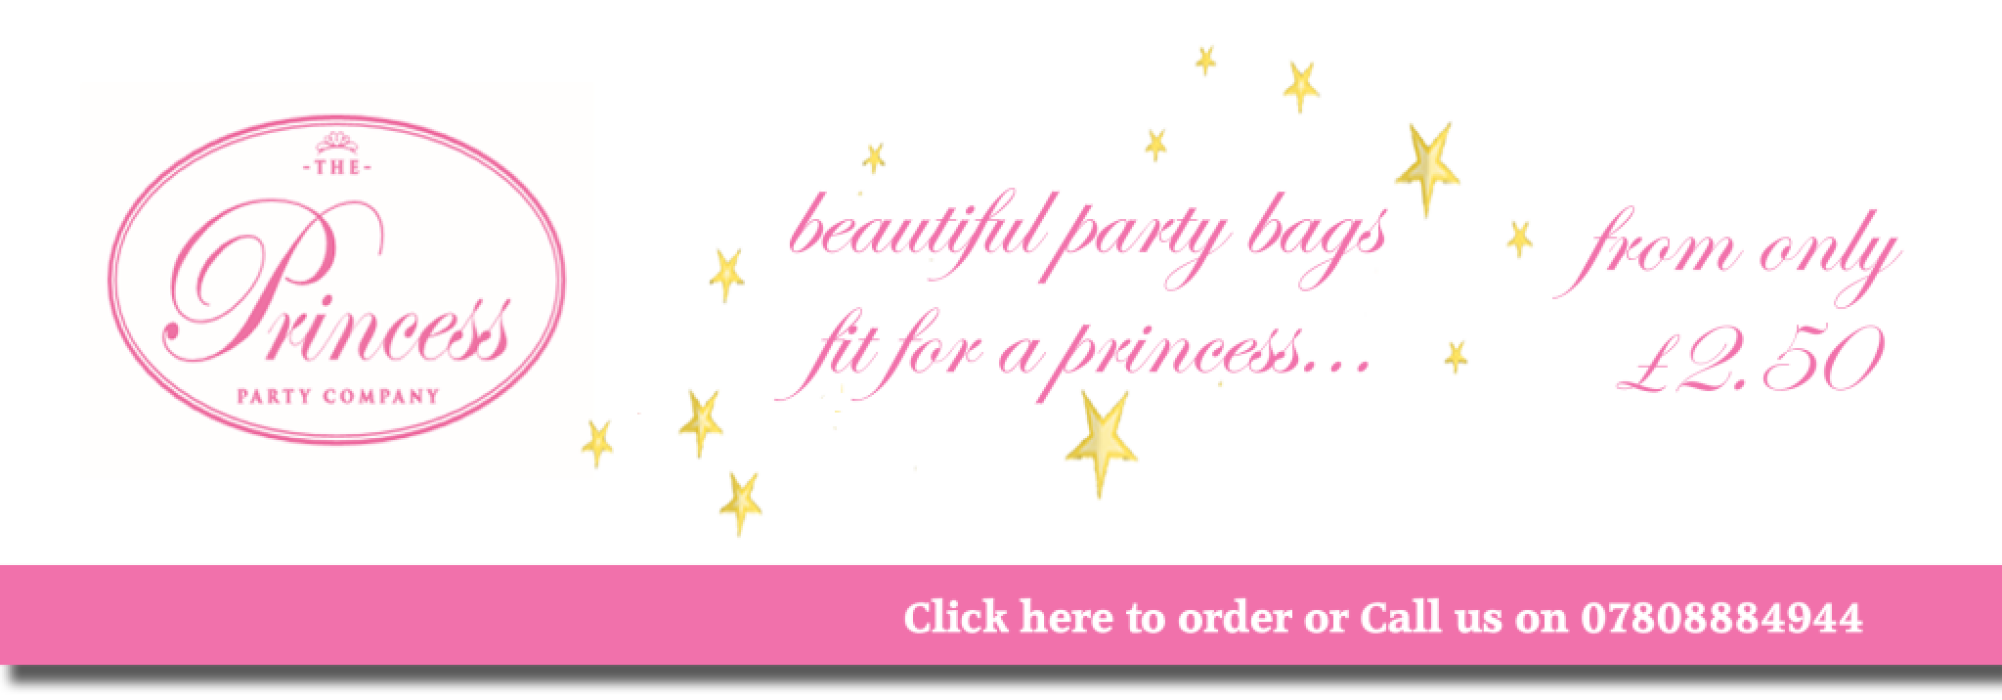 The Princess Party Co. Party Bags